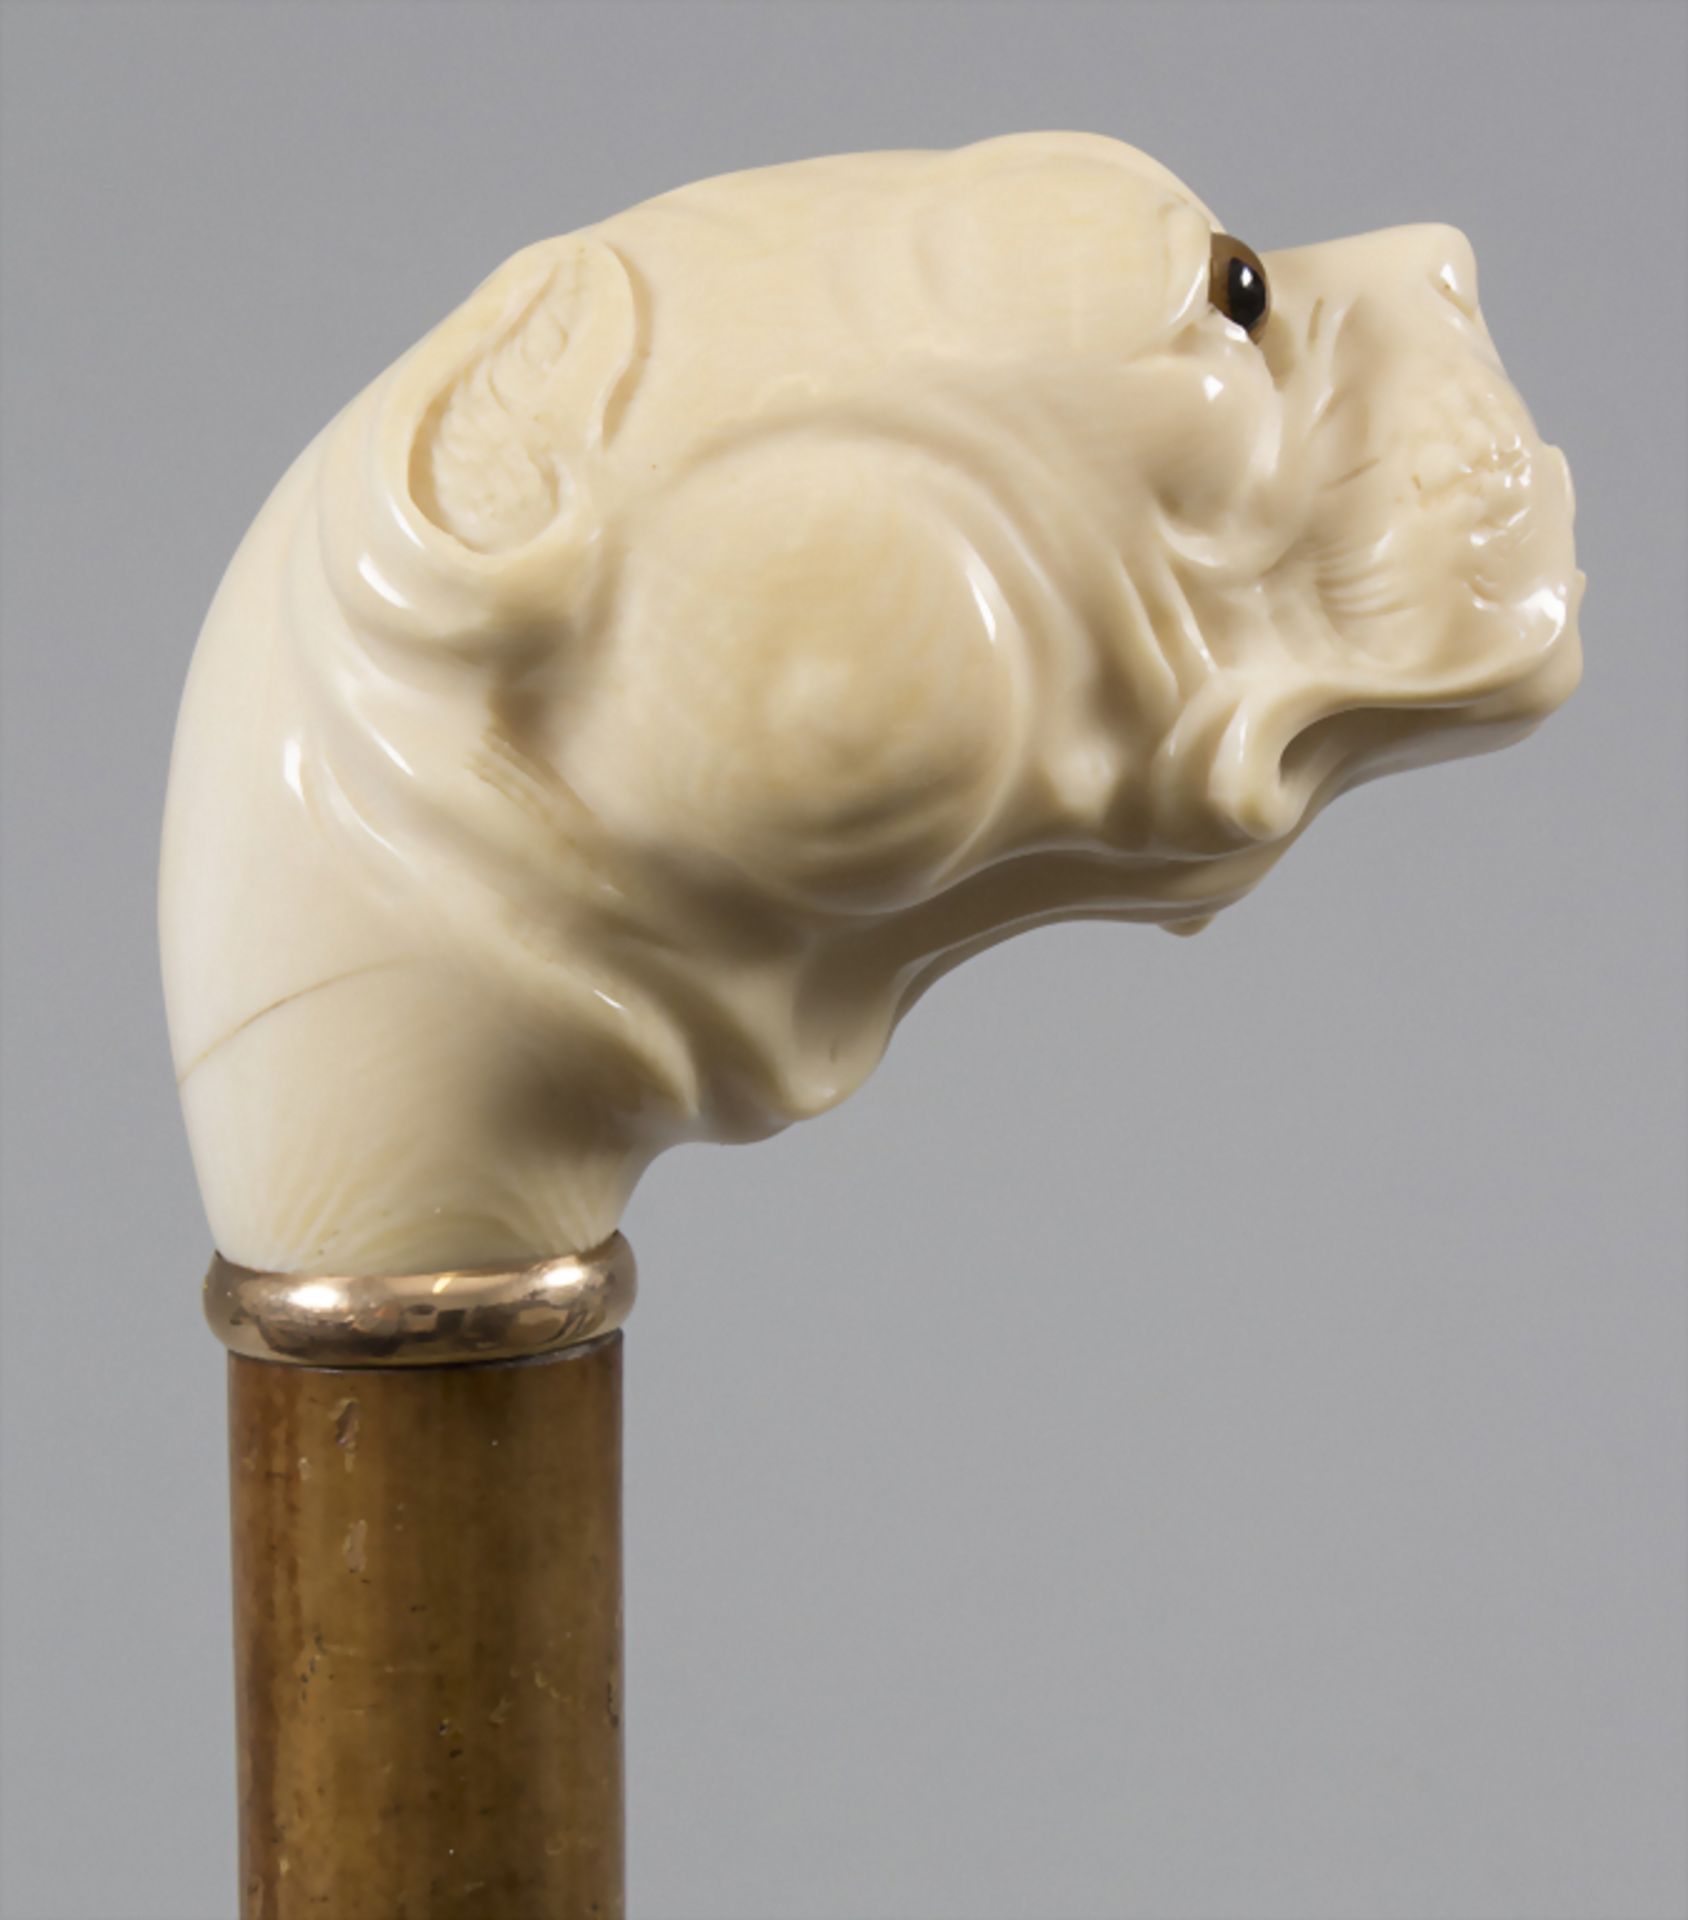 Spazierstock mit Bulldoggenkopf-Griff / A walking stick / cane with a bulldog's head shaped hilt - Image 3 of 5